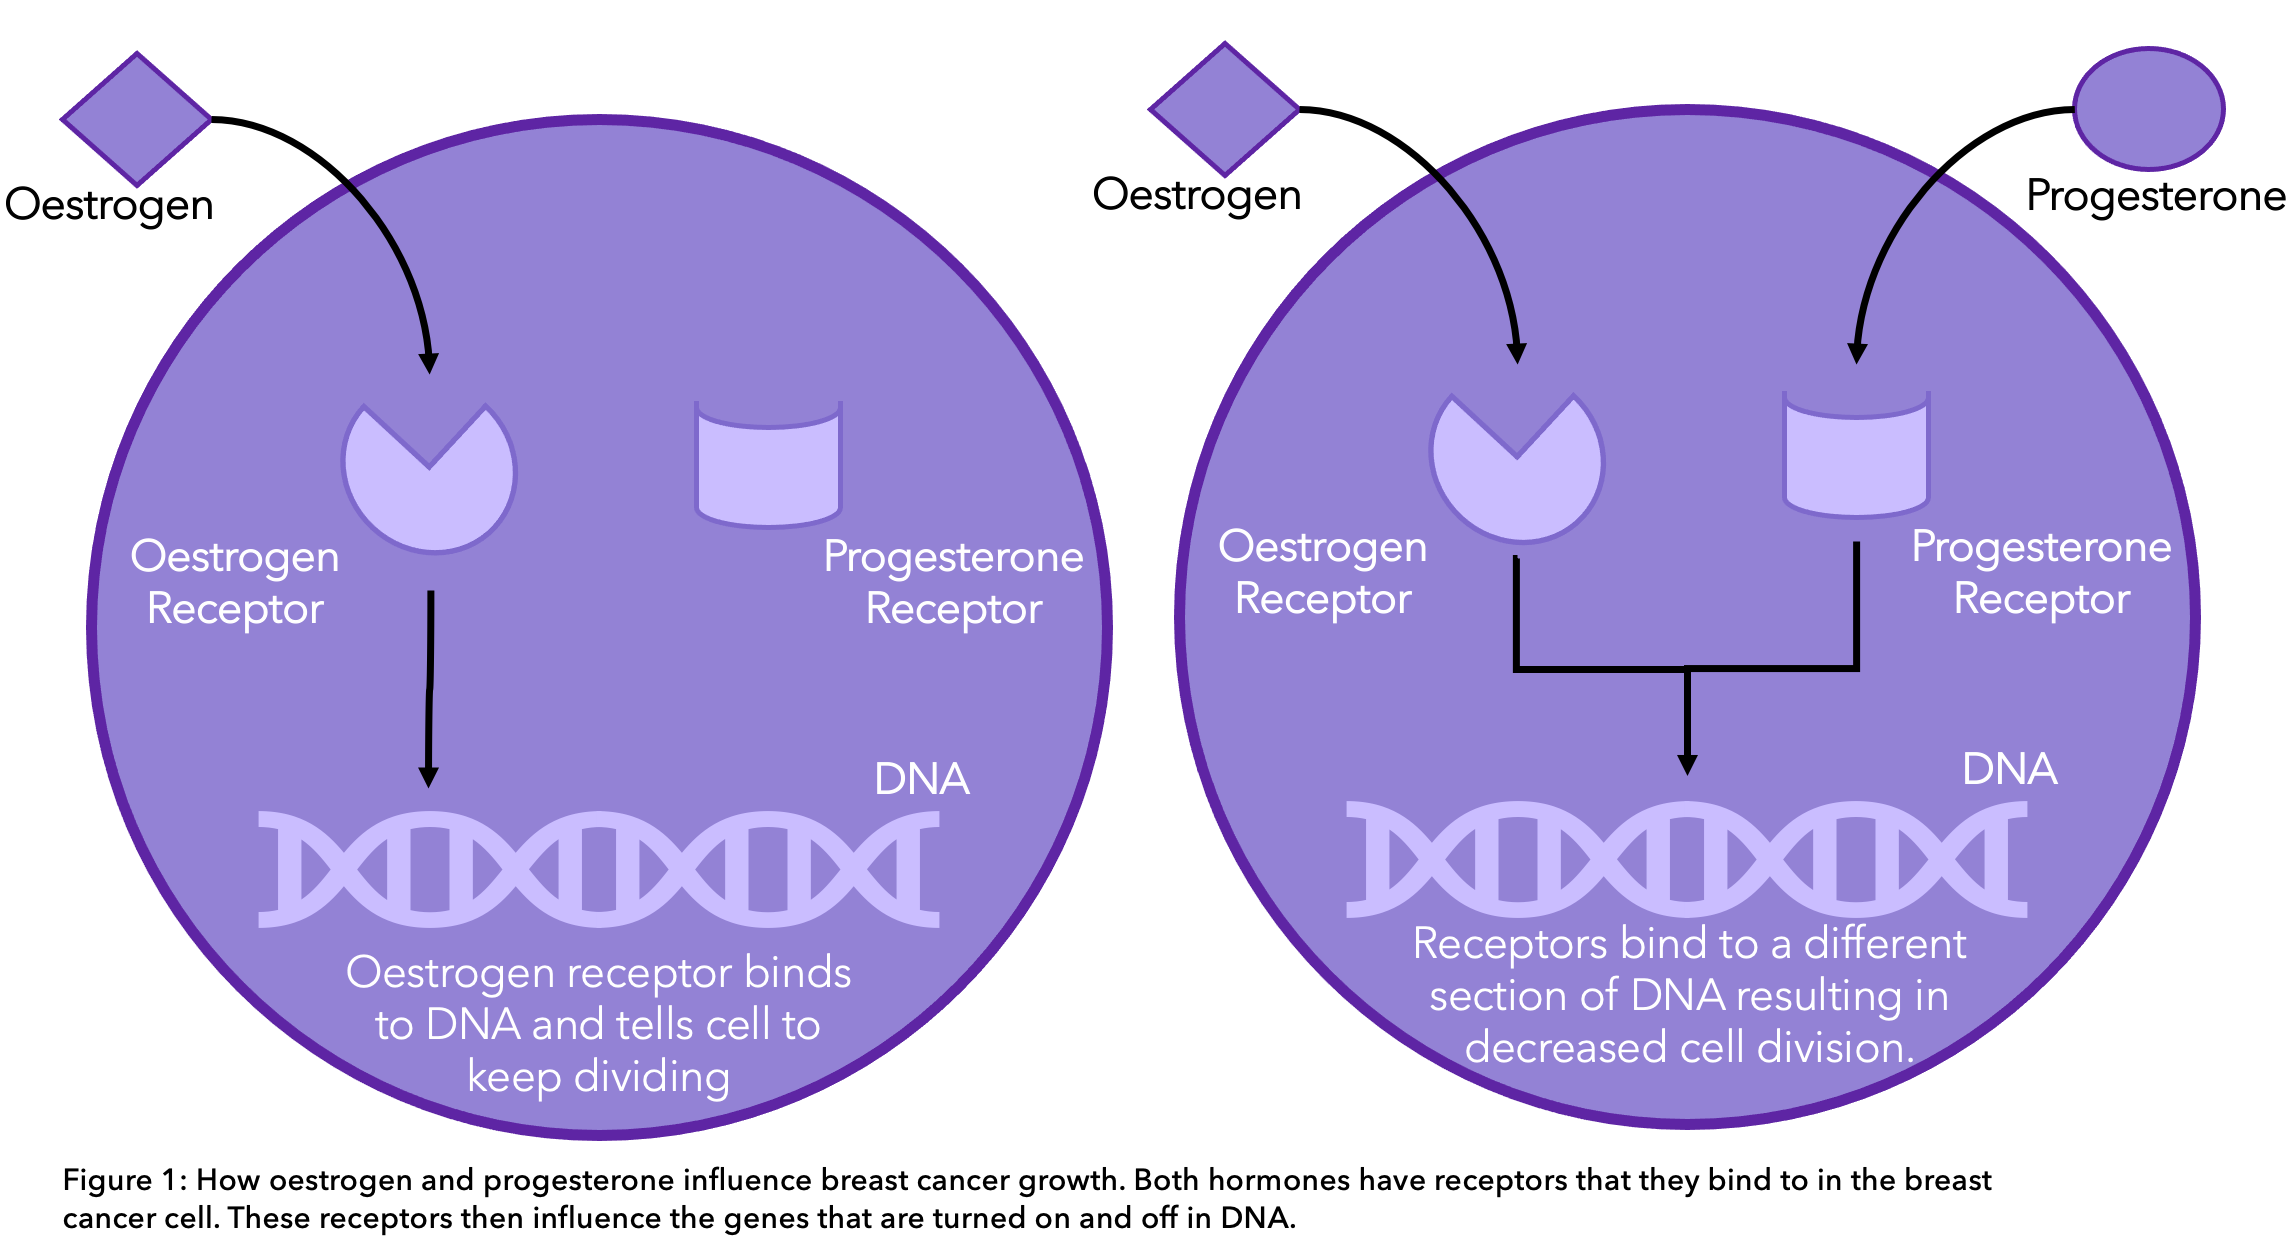 Diagram showing how oestrogen and progesterone cause cancer growth